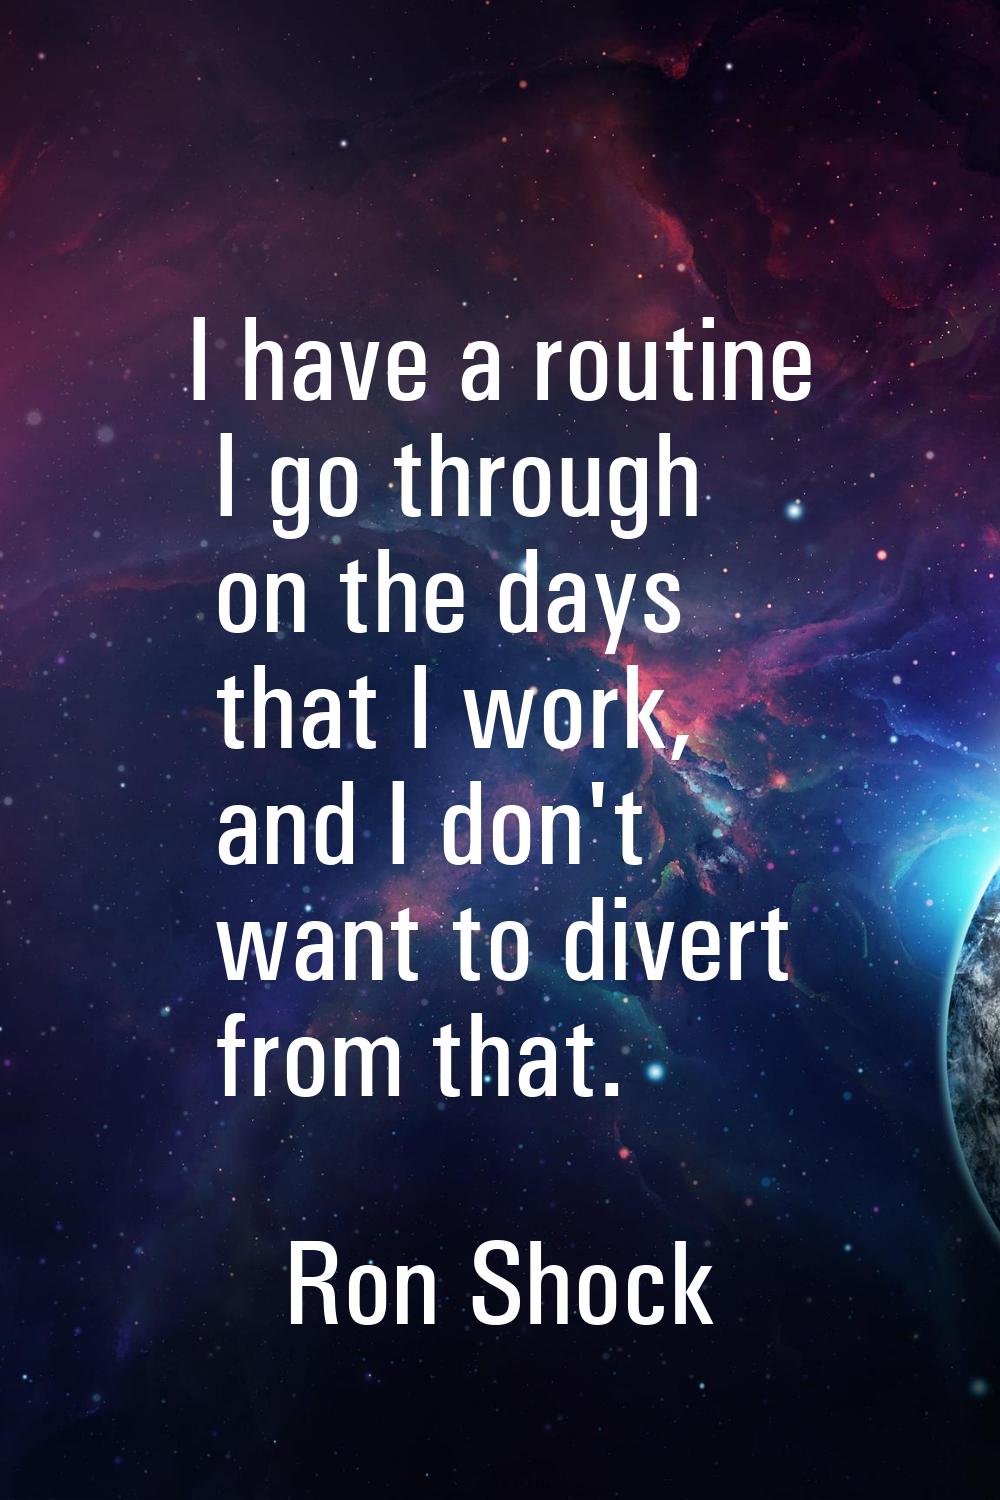 I have a routine I go through on the days that I work, and I don't want to divert from that.